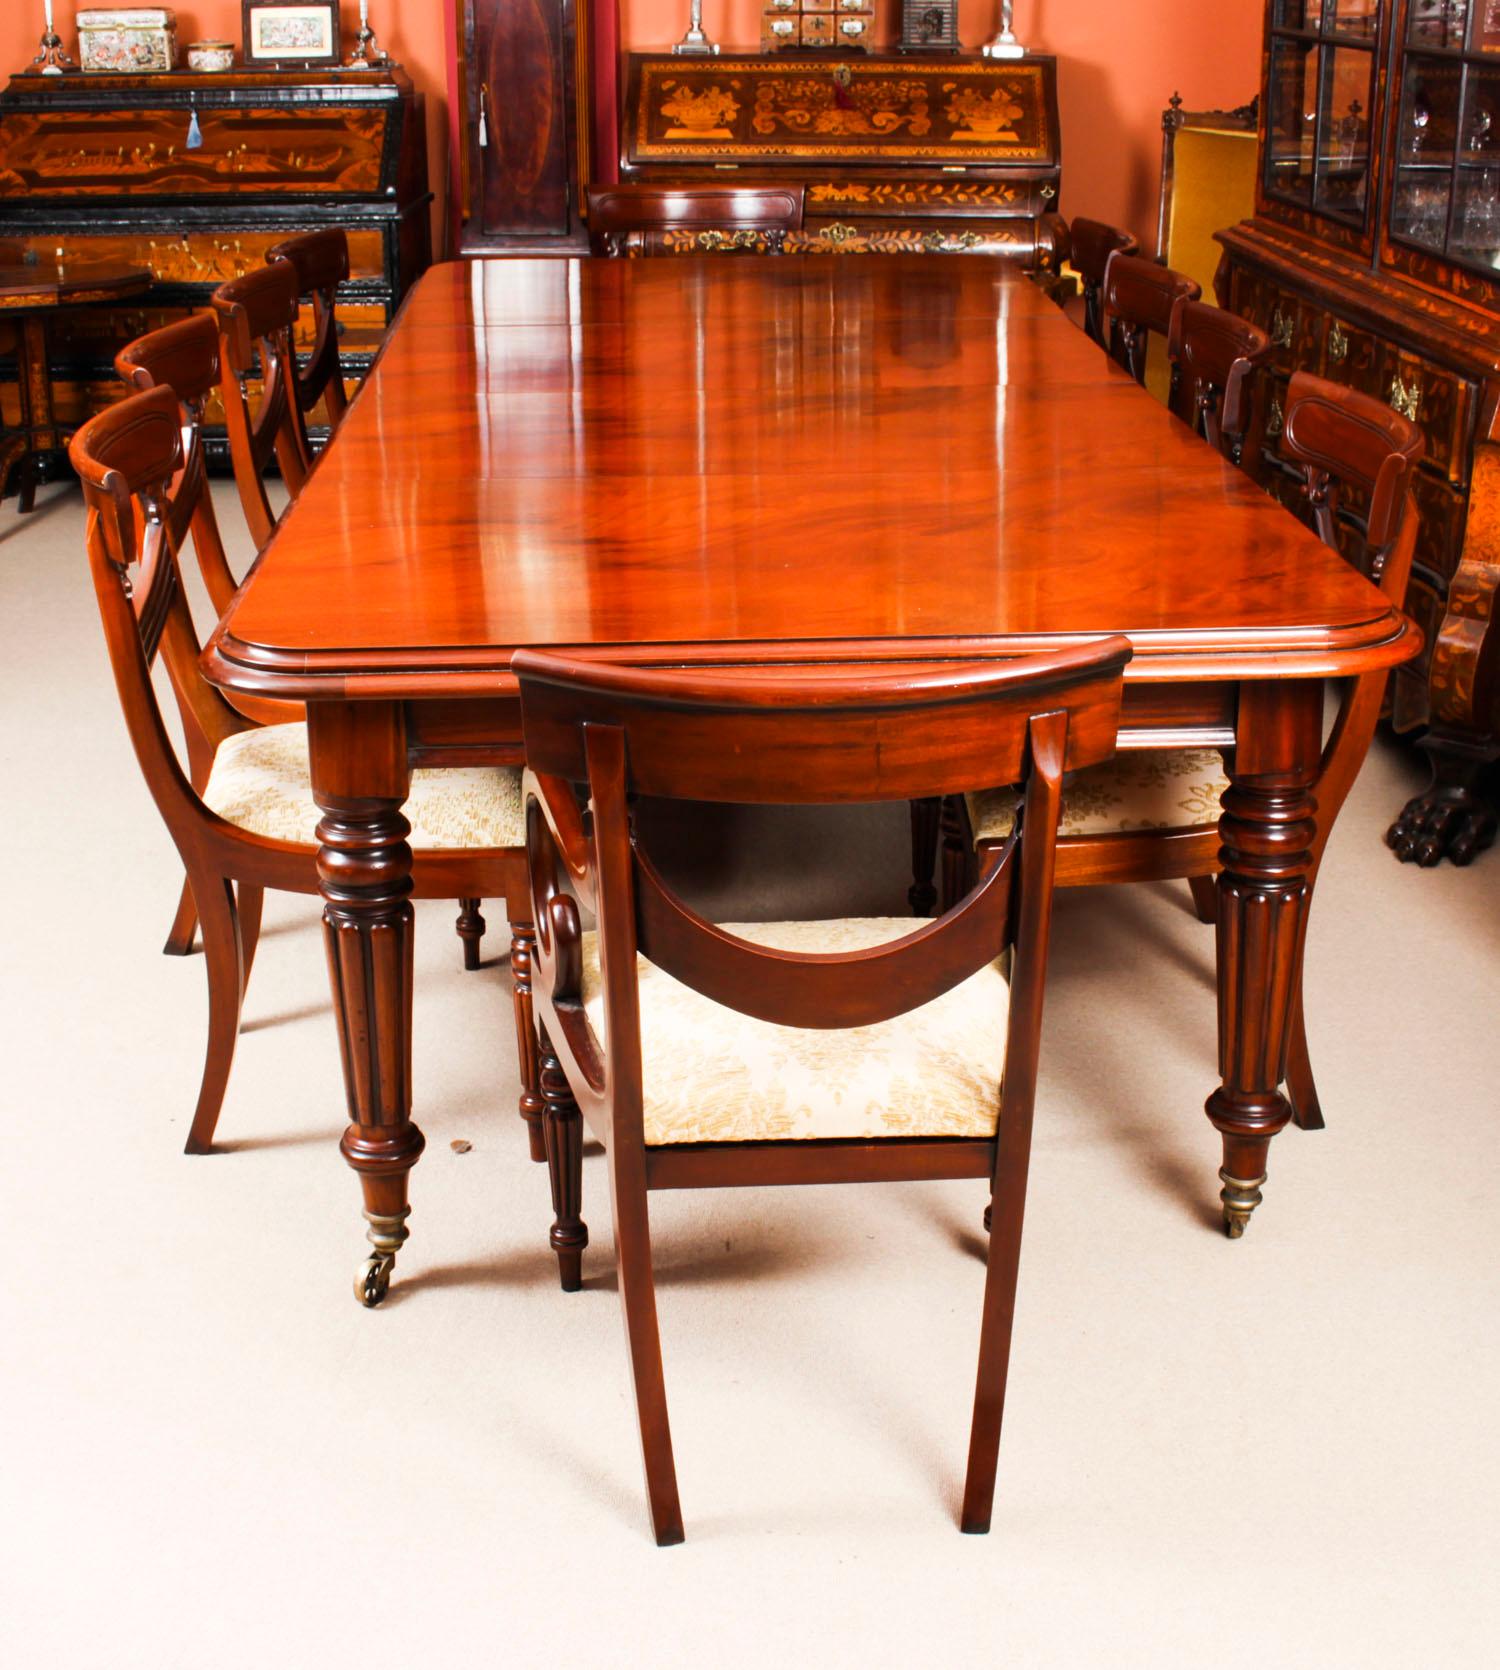 An absolutely fantastic vintage English-made Regency Revival dining set comprising a dining table with the set of ten matching swag back dining chairs, all dating from the late 20th century.

The magnificent vintage Regency Revival extending